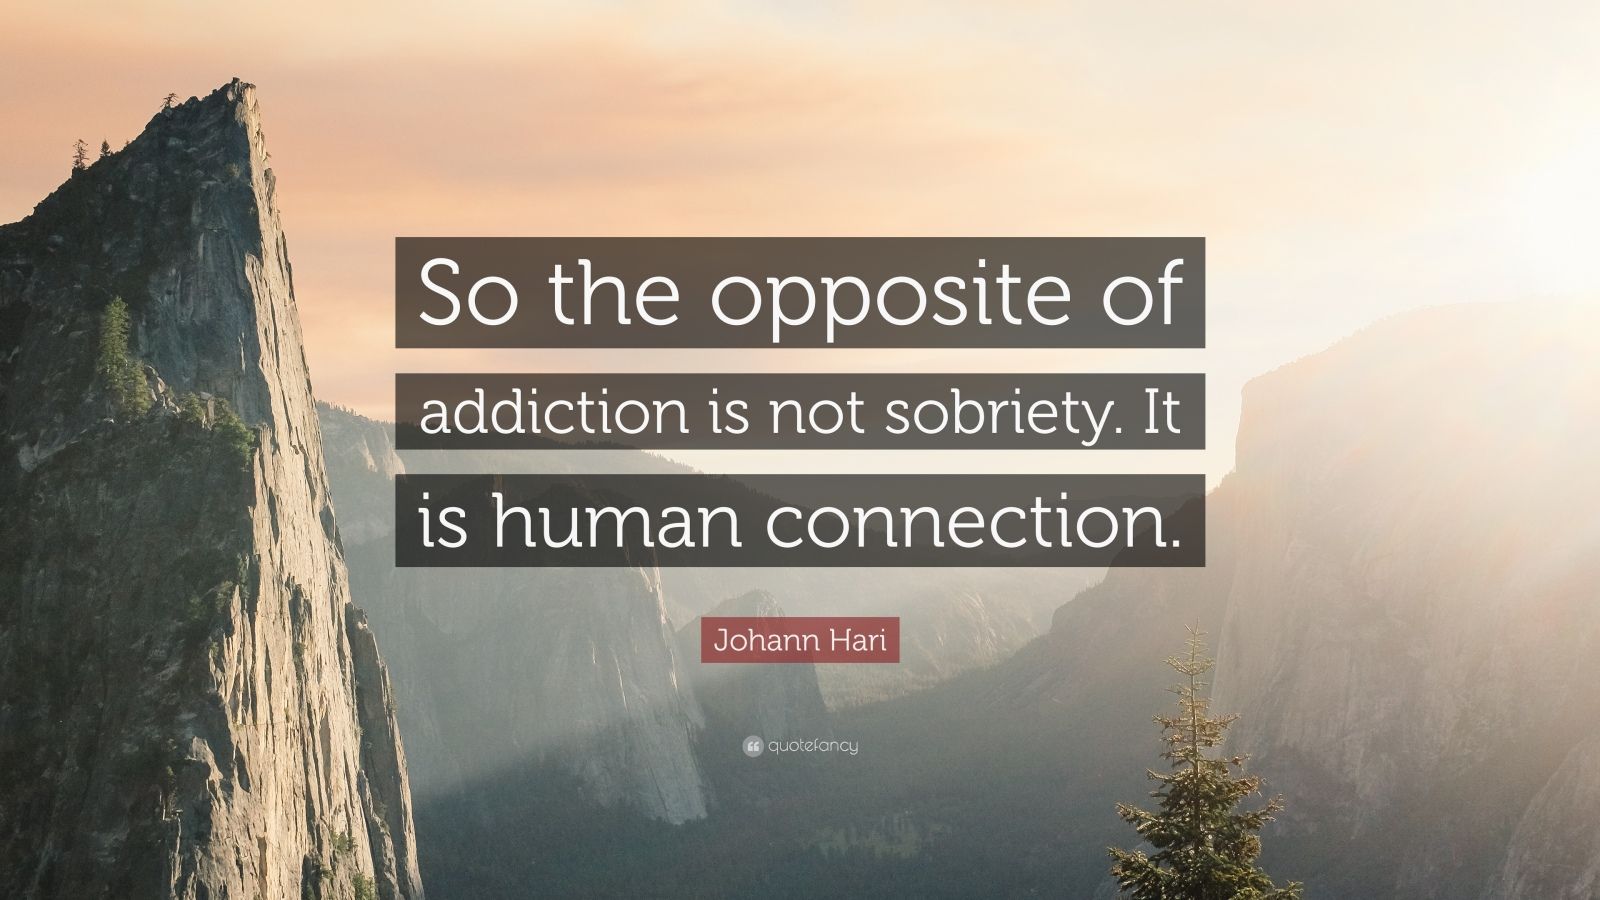 Johann Hari Quote: “So the opposite of addiction is not sobriety. It is